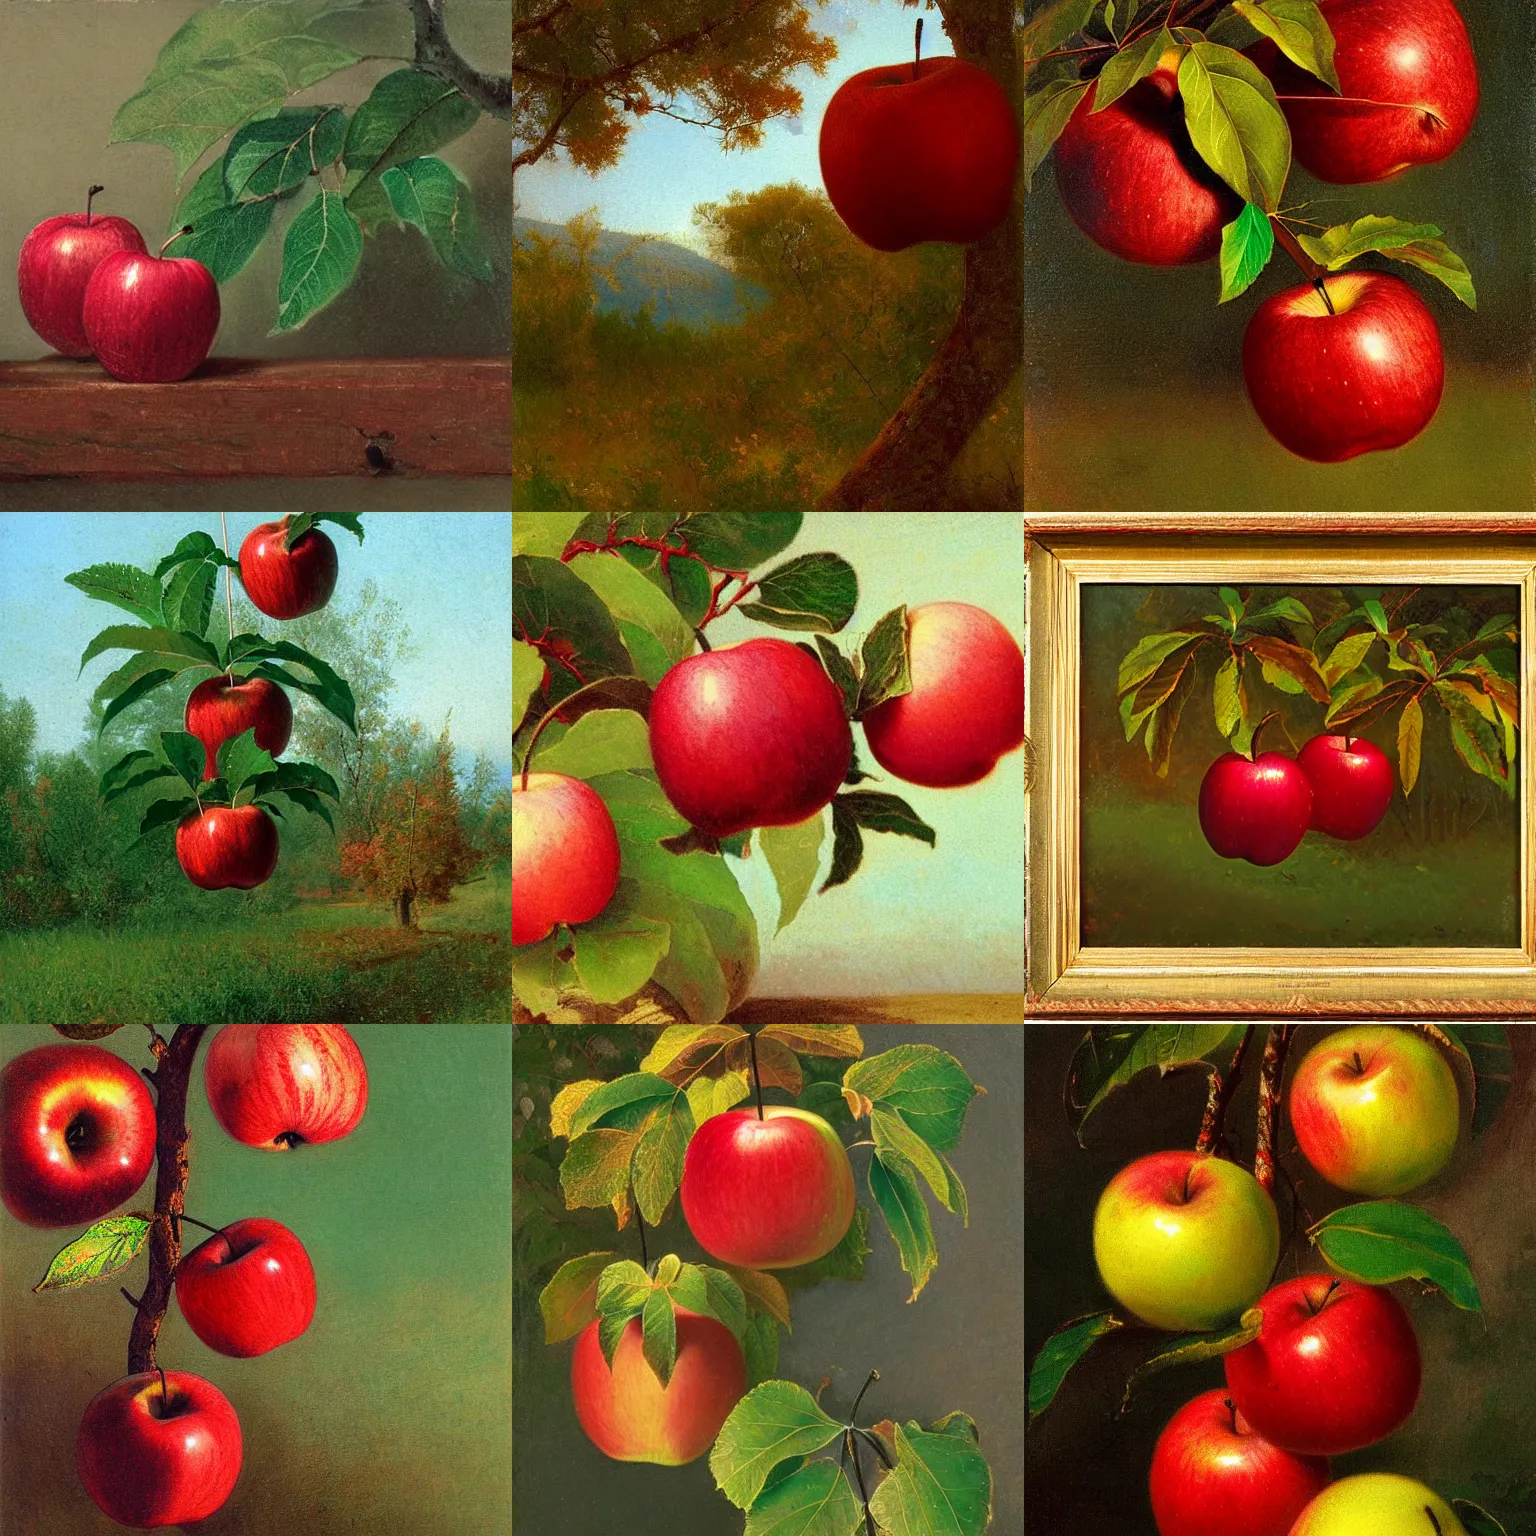 Prompt: iridescent red apples hanging from a branch with emerald green leaves painted by Bierstadt